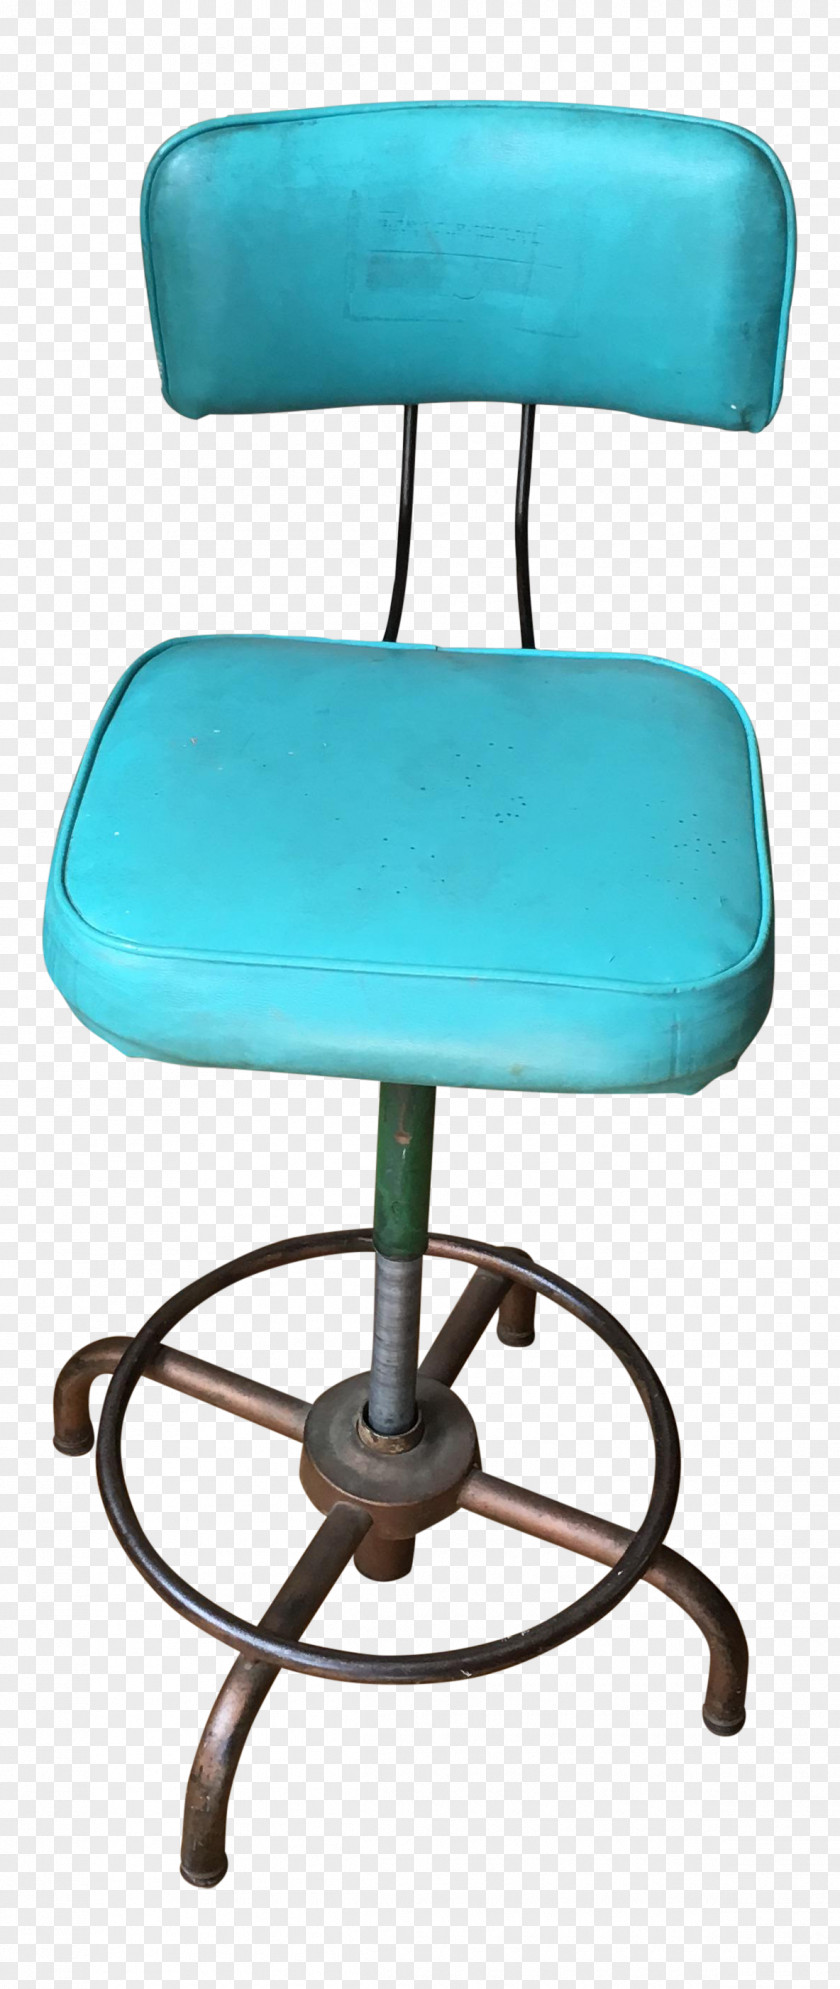 Drafting & Diagrams Product Design Plastic Chair PNG